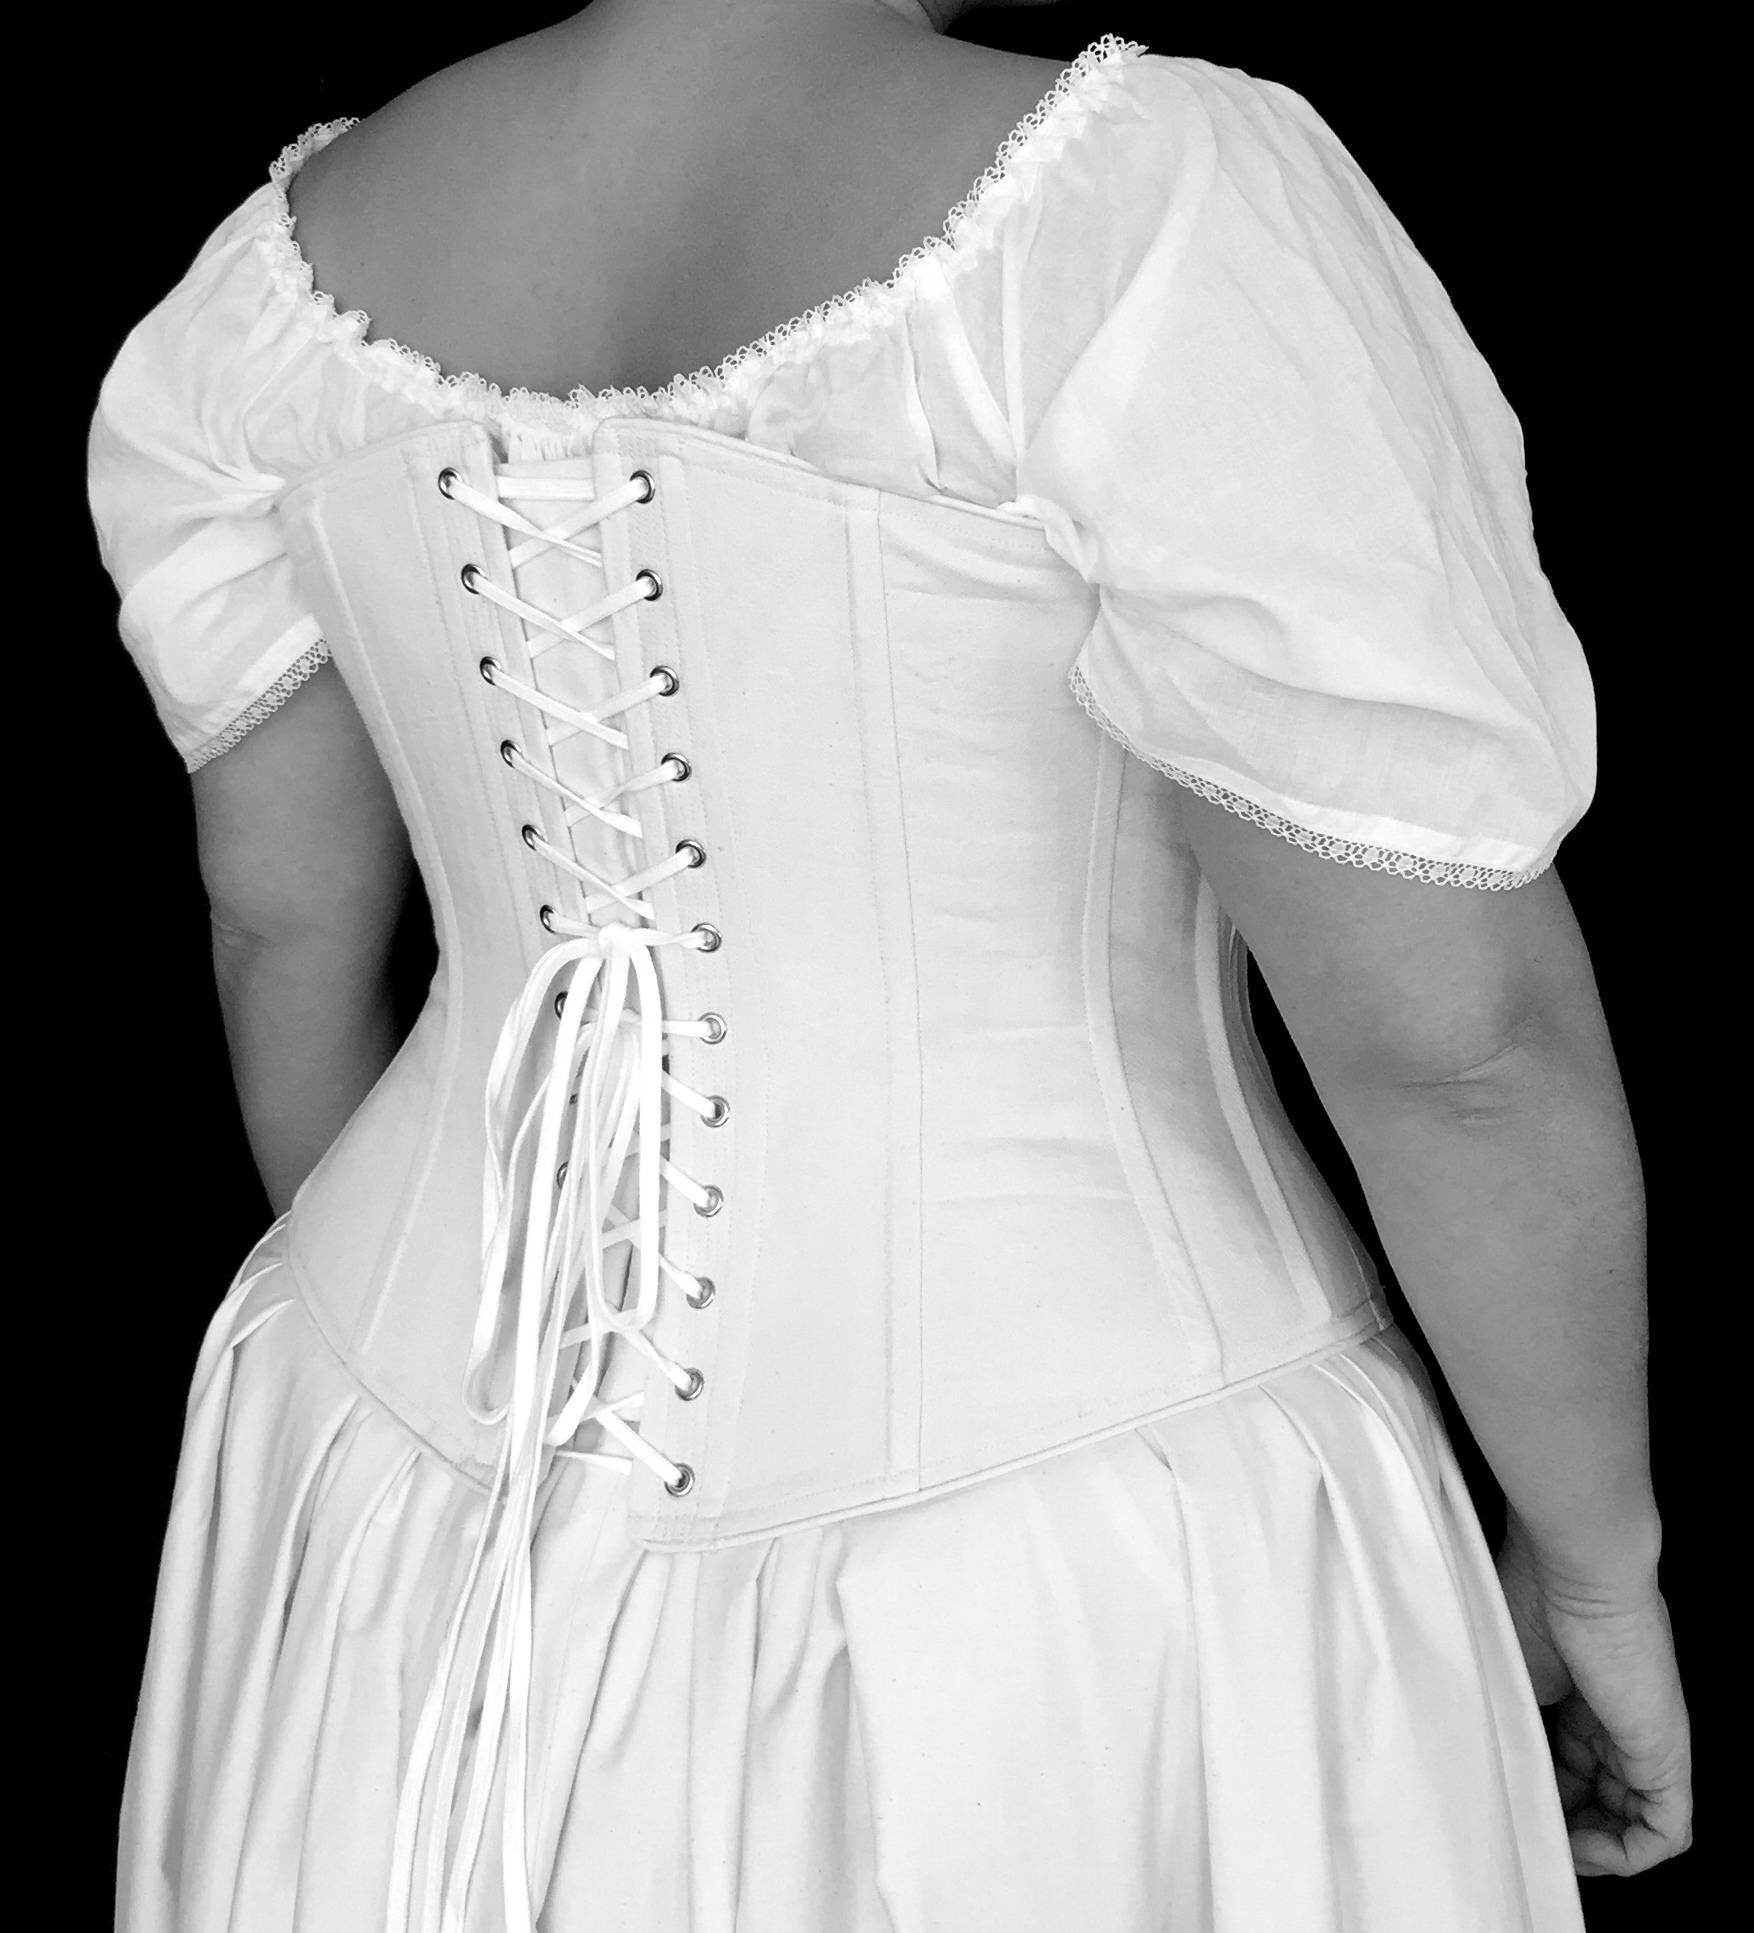 Plus Size Curvy Victorian Corset Overbust C.1860 in Brocade, Satin Coutil,  Hourglass Historical Costume Undergarment Cosplay Bridal Wedding -   Canada